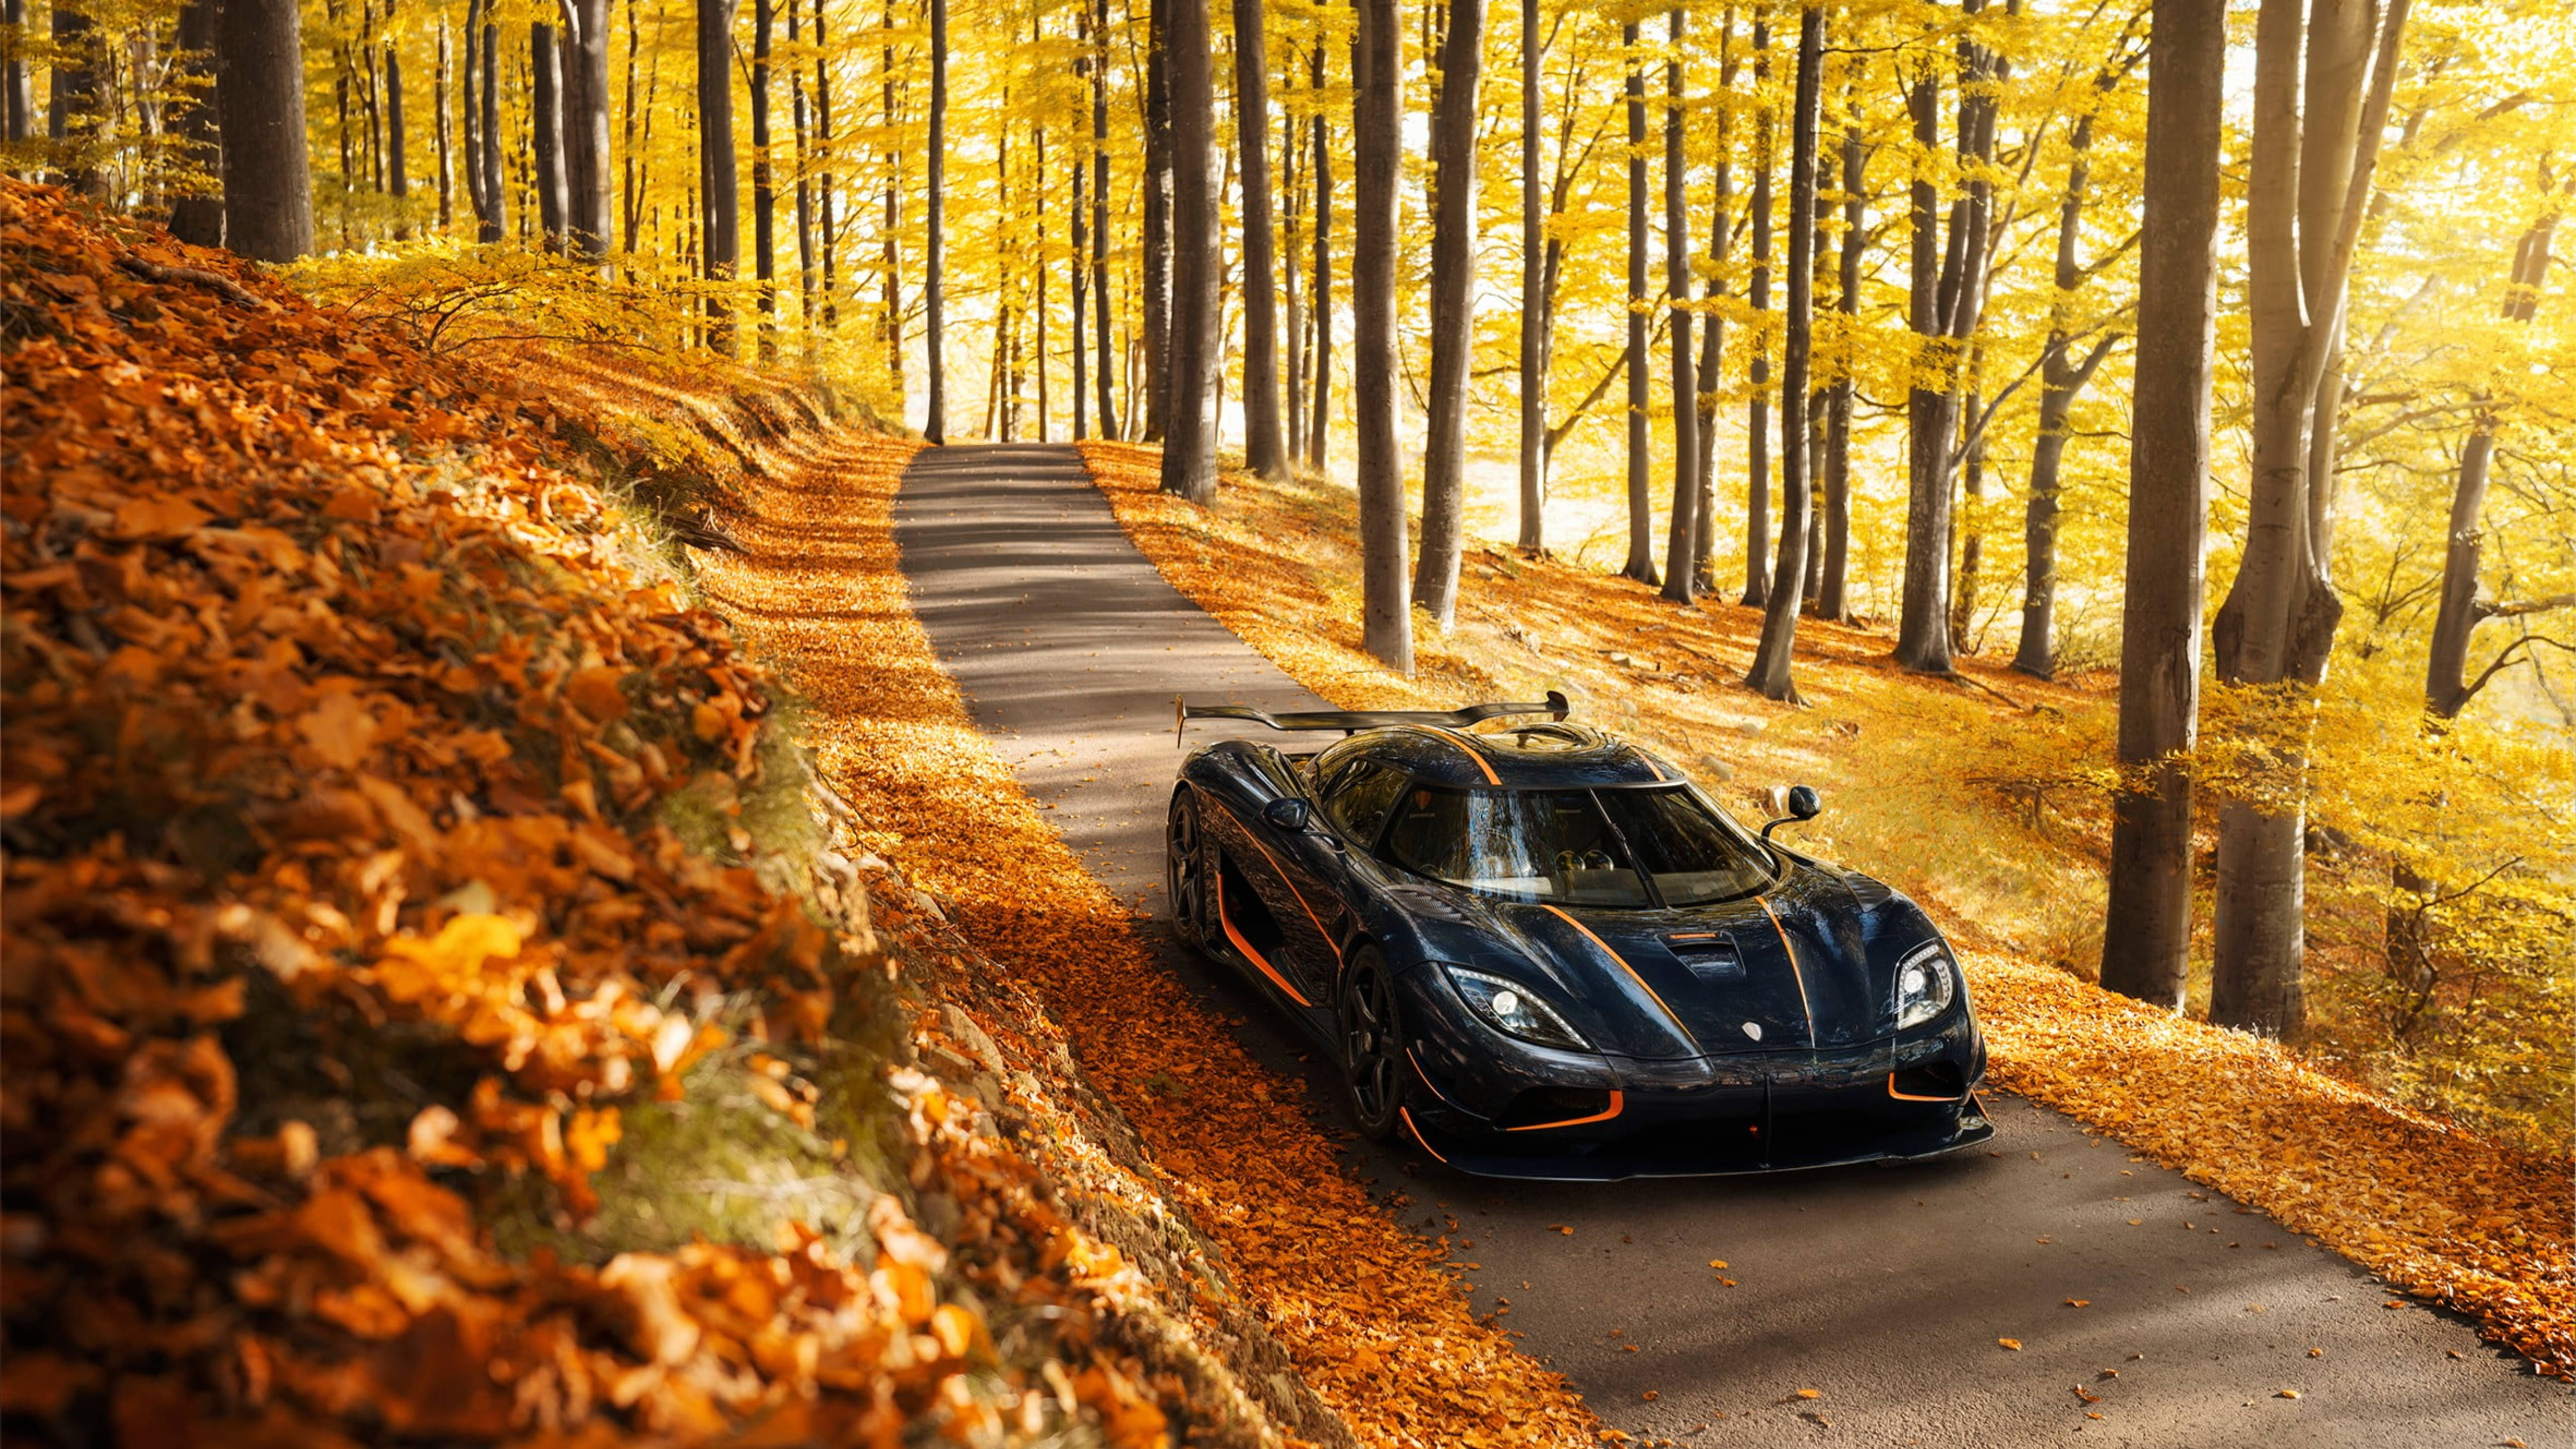 Download Sports Car In Autumn Wallpaper